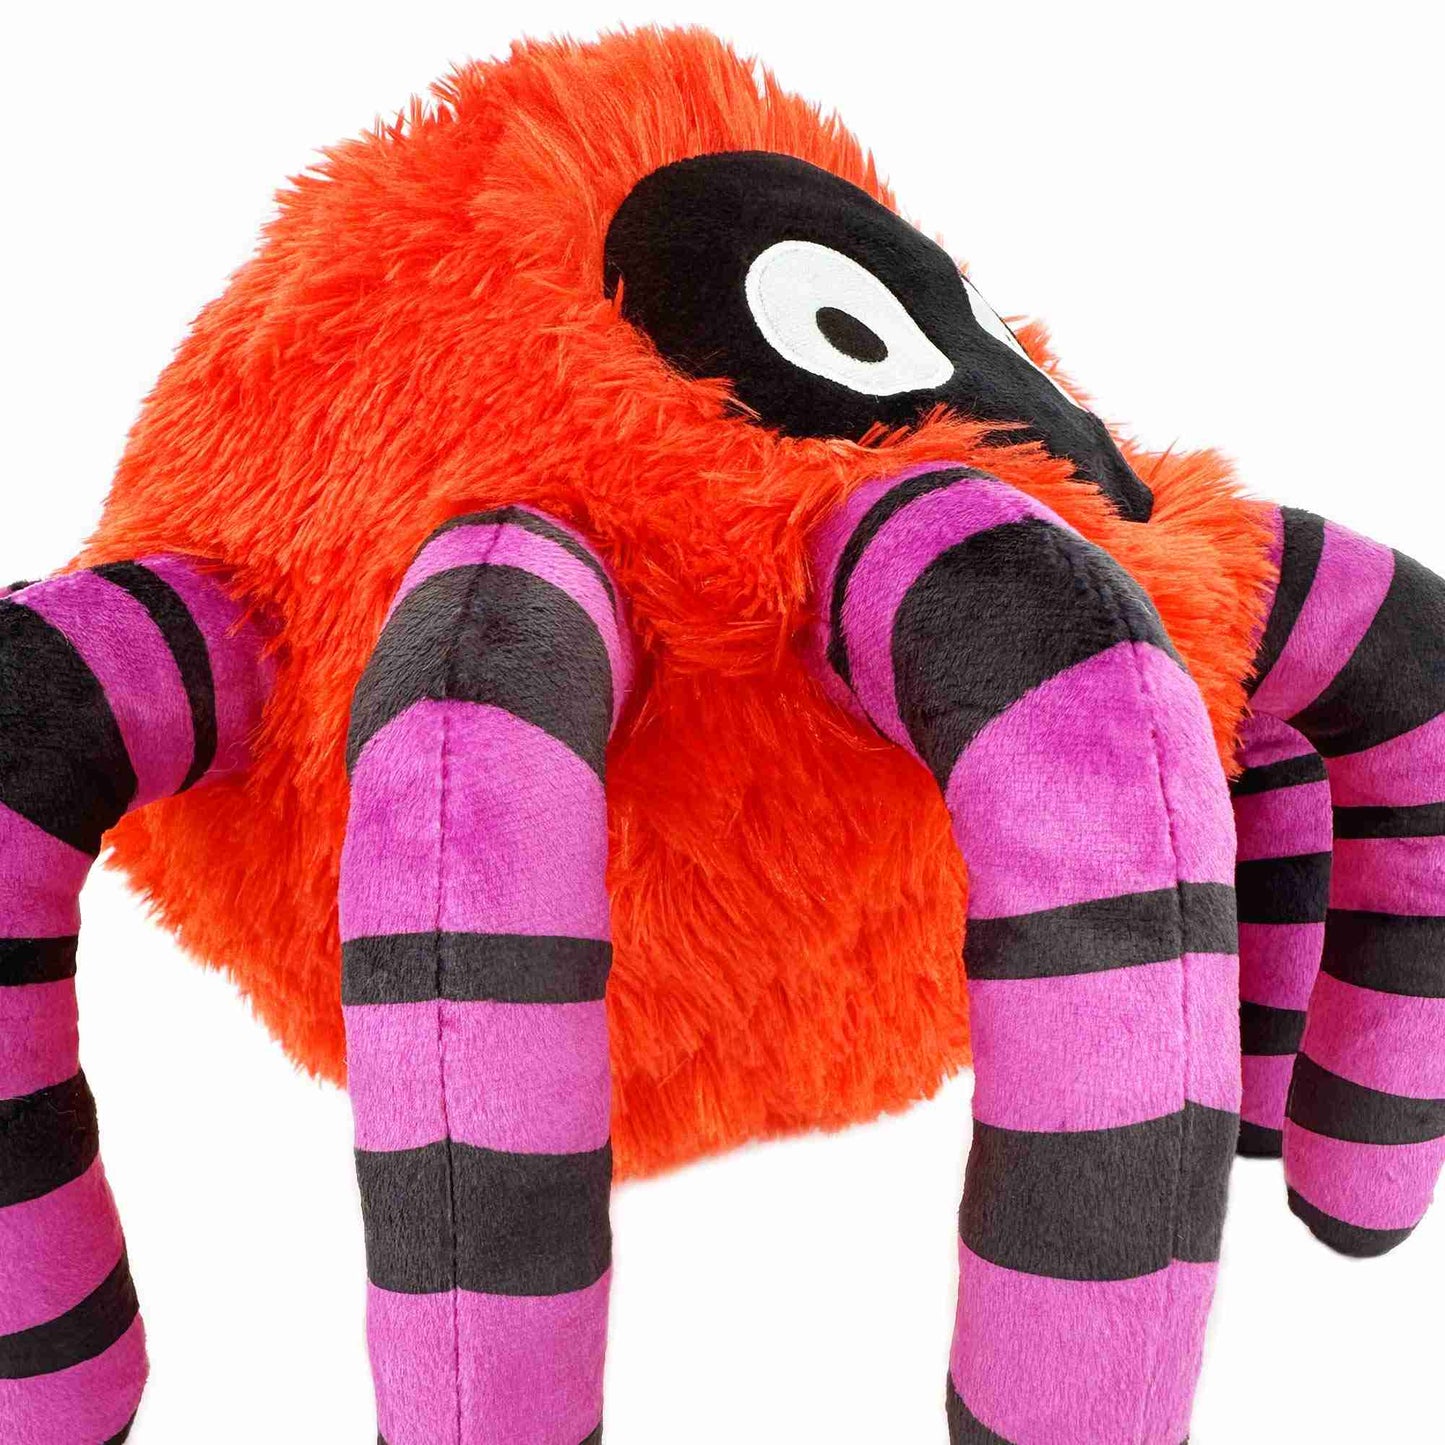 spooky spider stuffed animal close up view